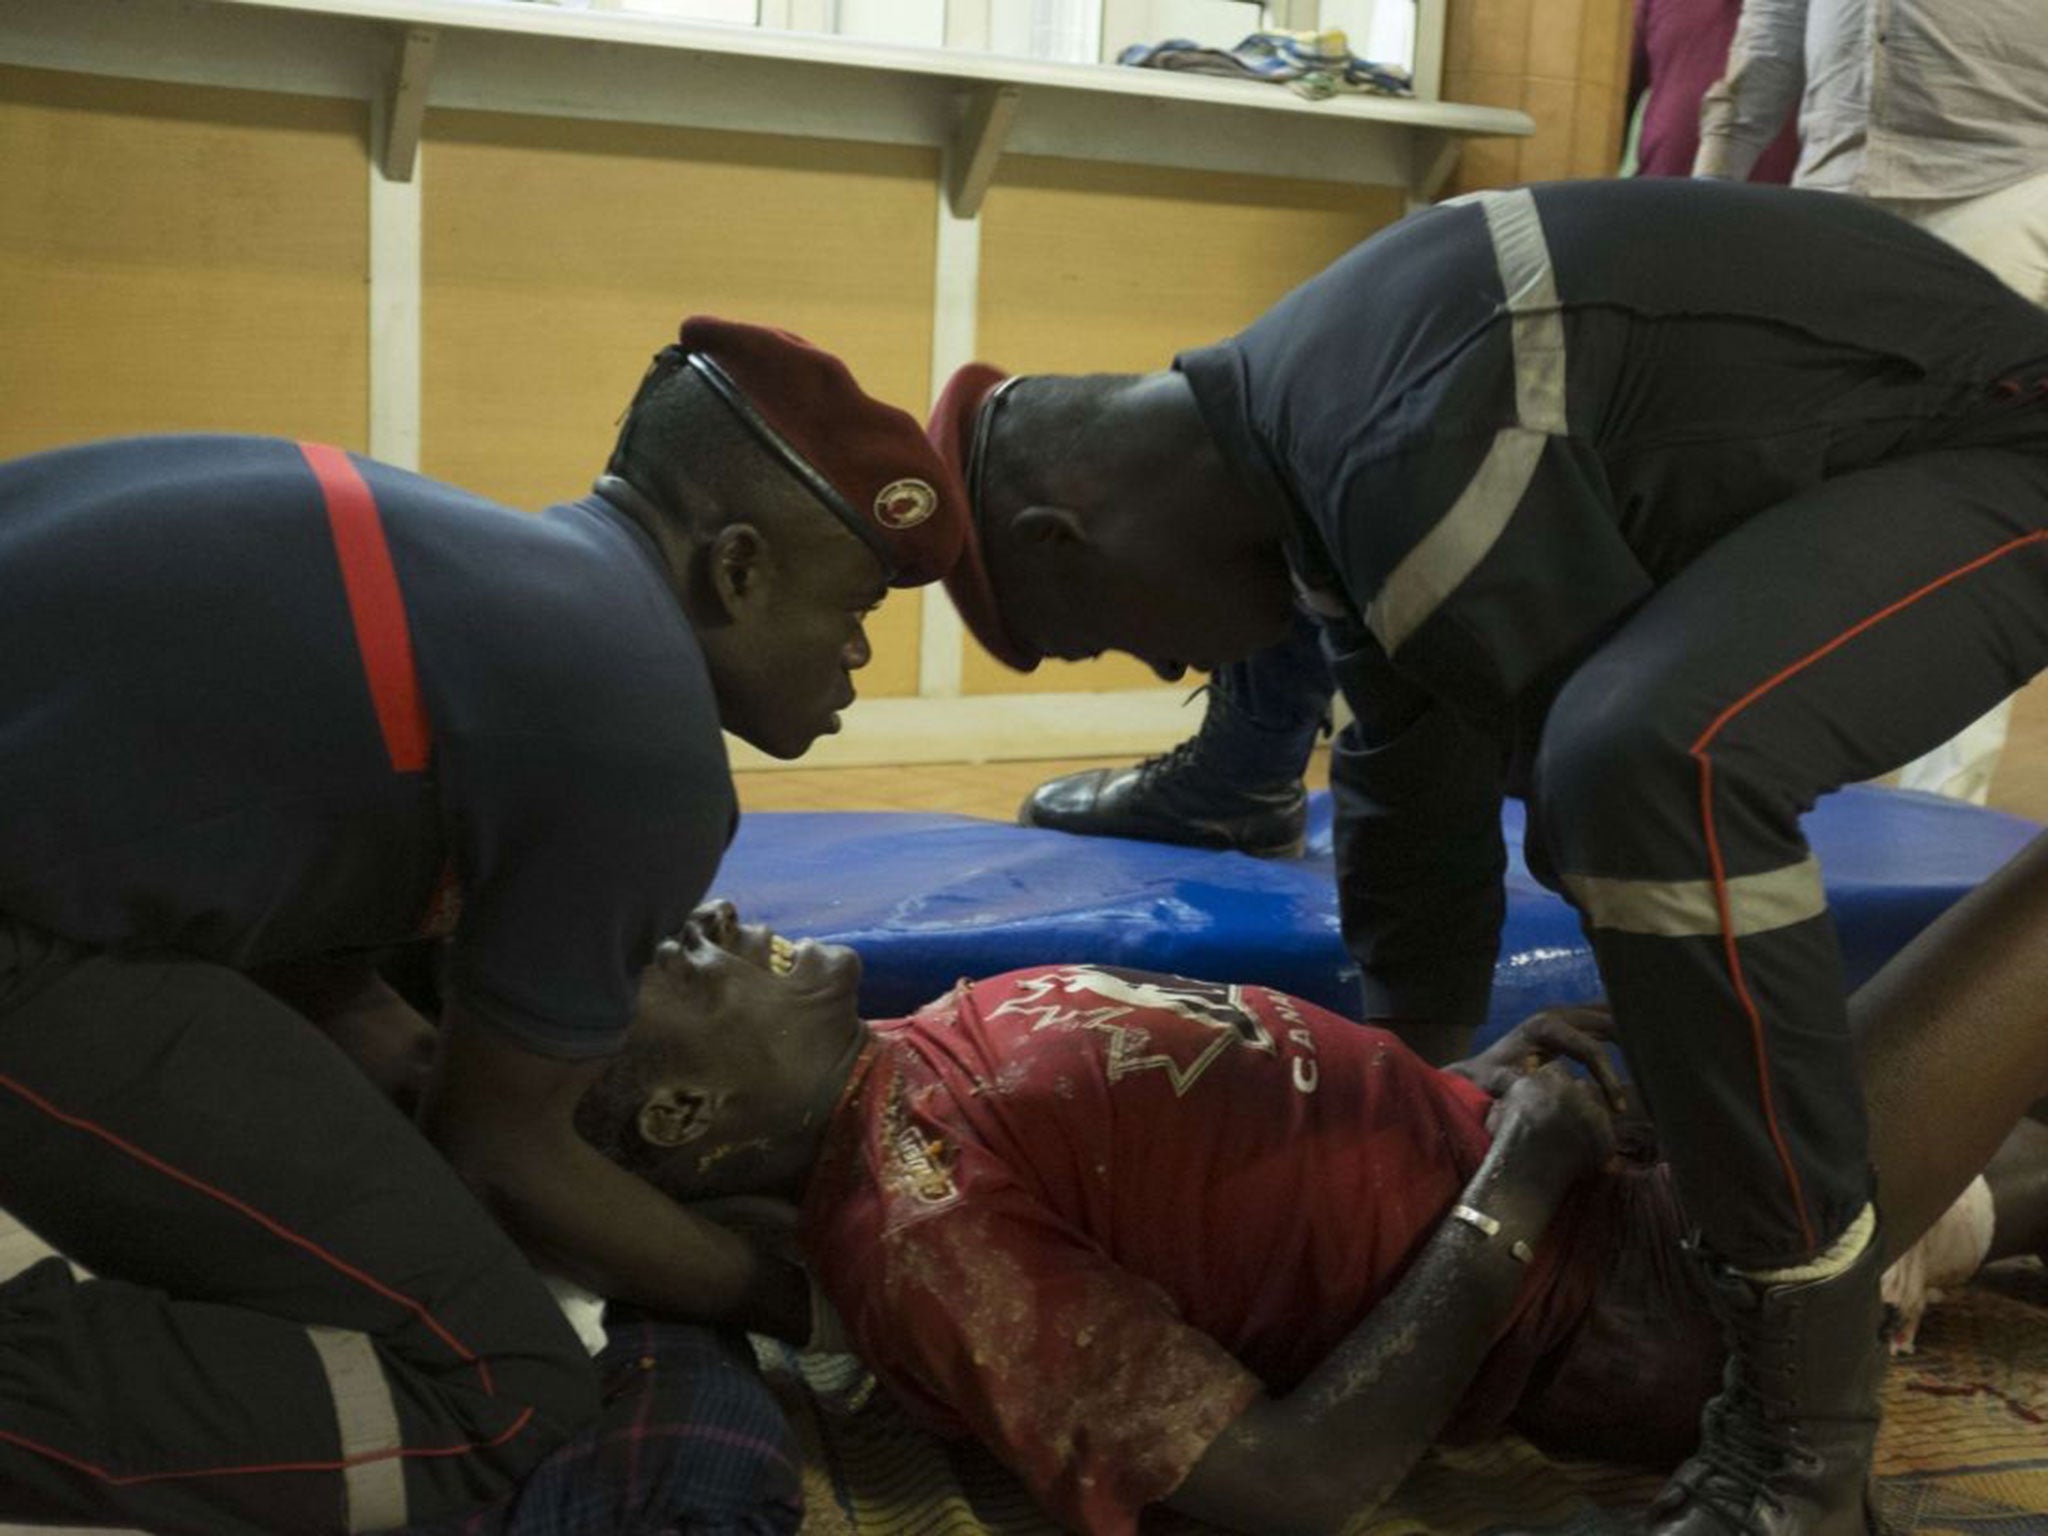 Paramedics tend to a wounded man in the surrounding of the hotel Splendide and the cafe Cappuccino during the attack on January 15, 2016.